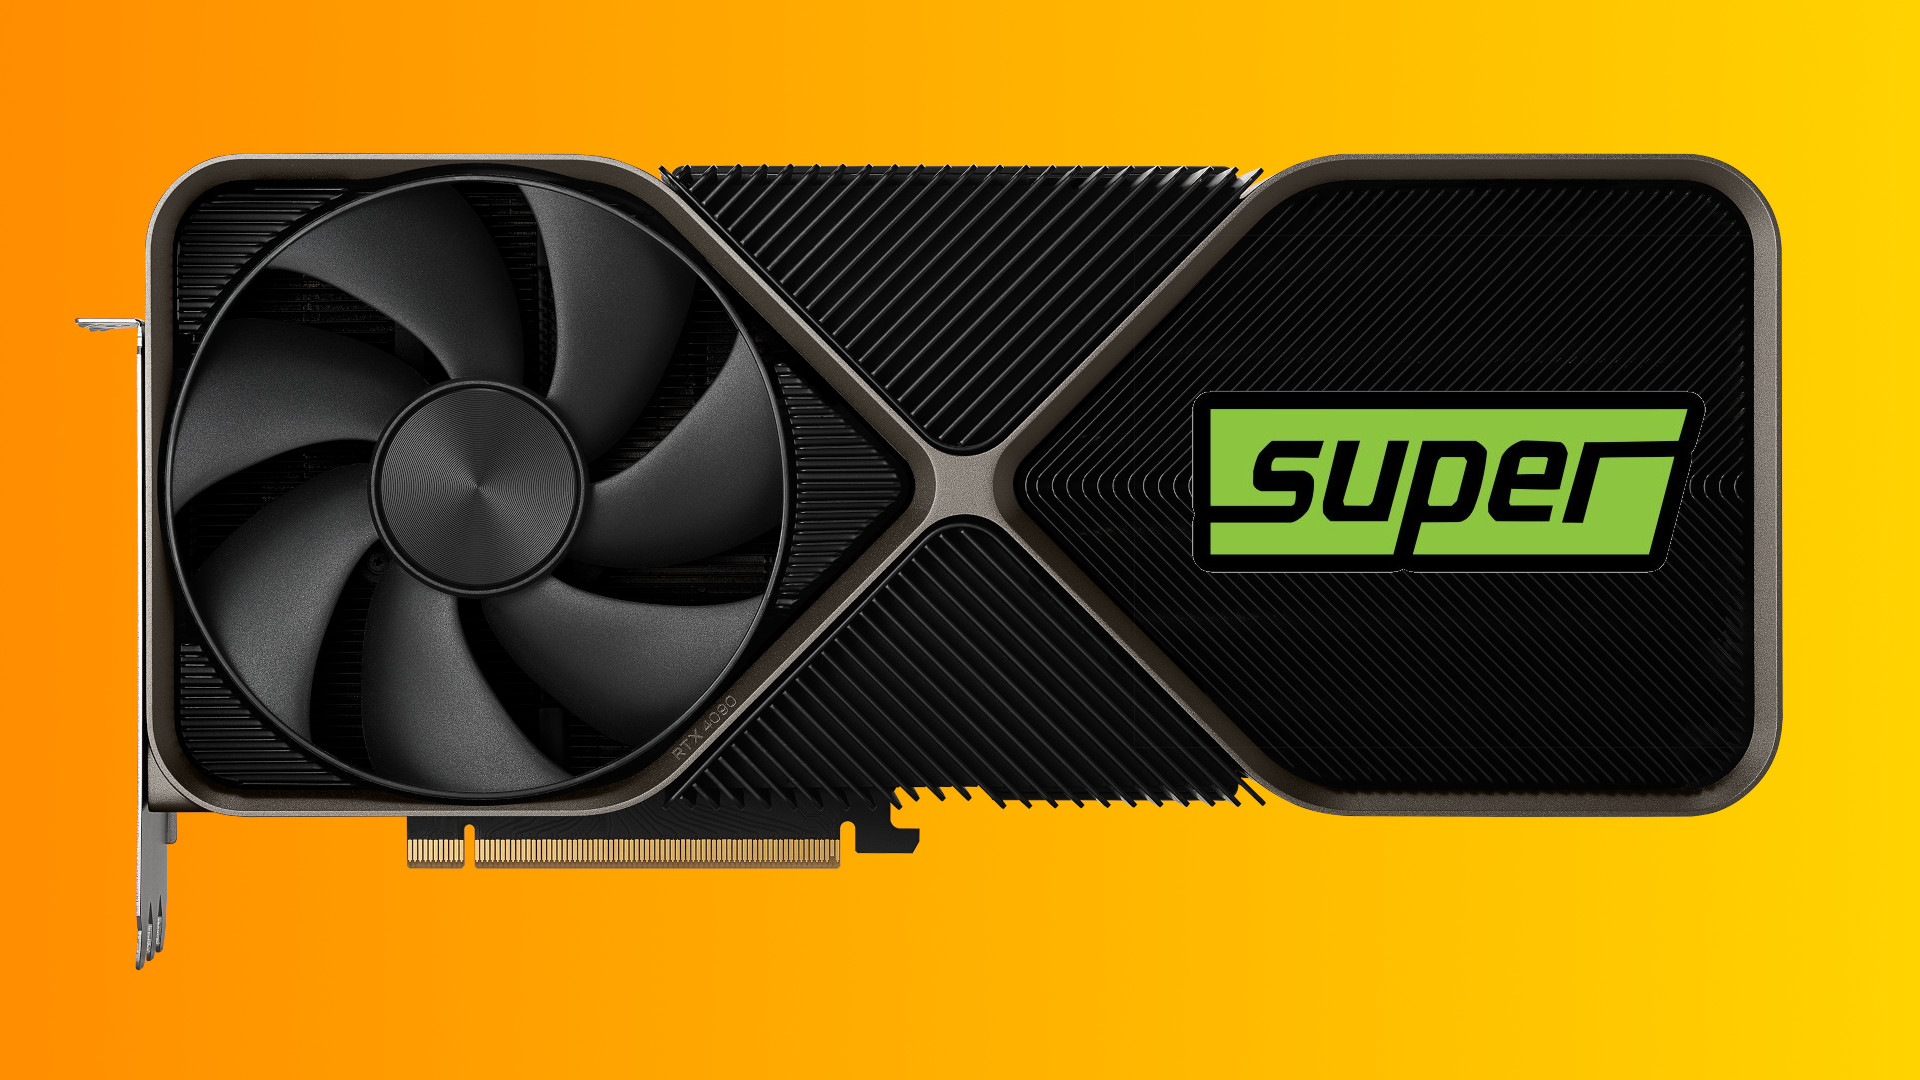 Where to buy the Nvidia GeForce RTX 4070: Specs, performance